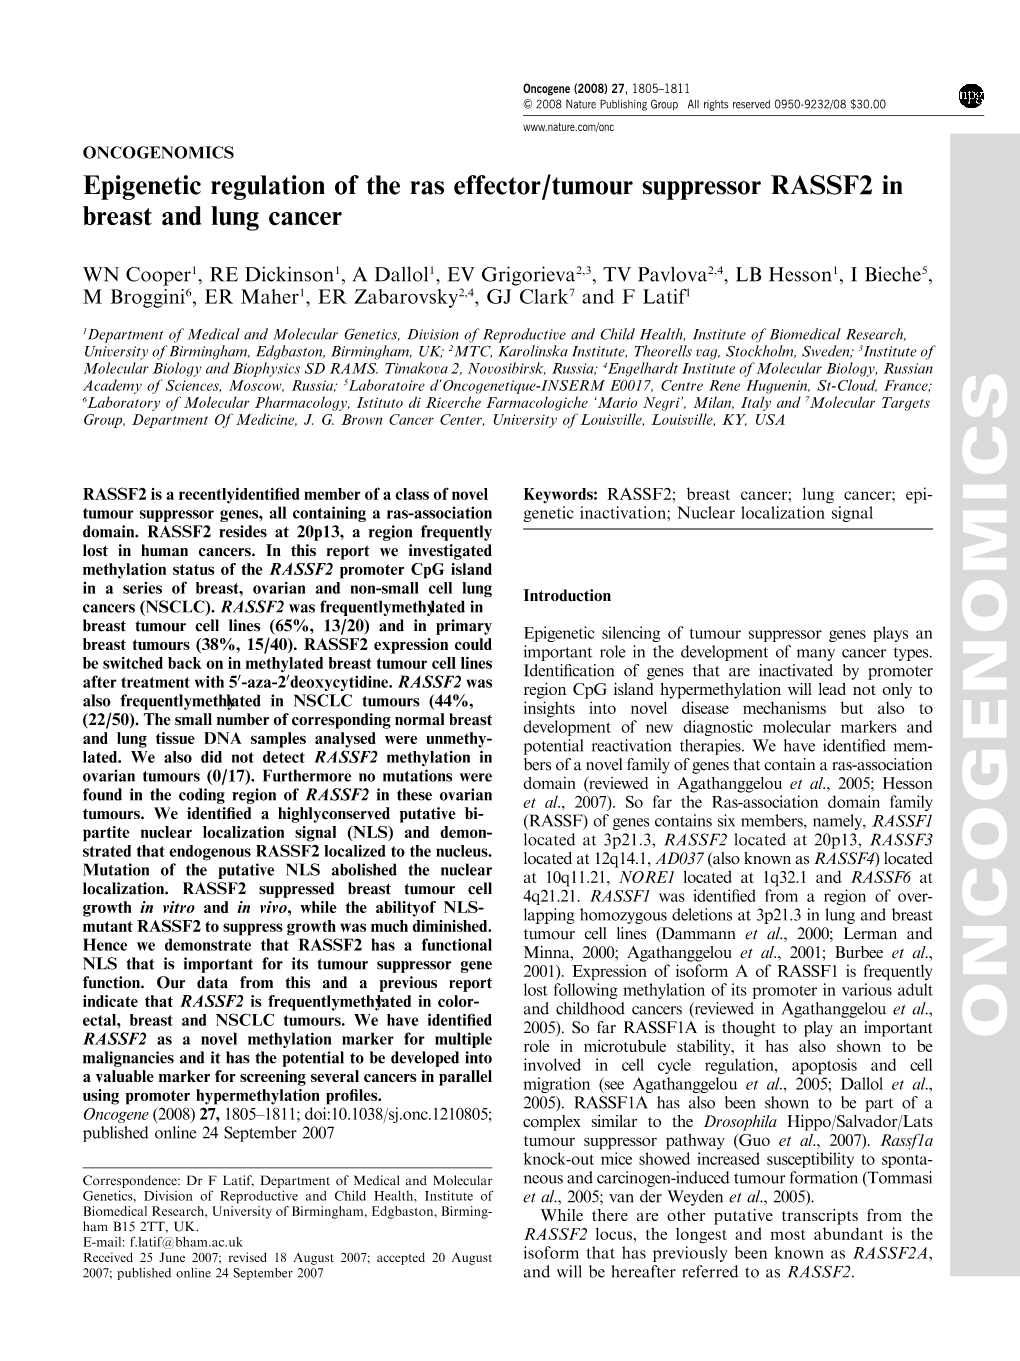 Epigenetic Regulation of the Ras Effector/Tumour Suppressor RASSF2 in Breast and Lung Cancer